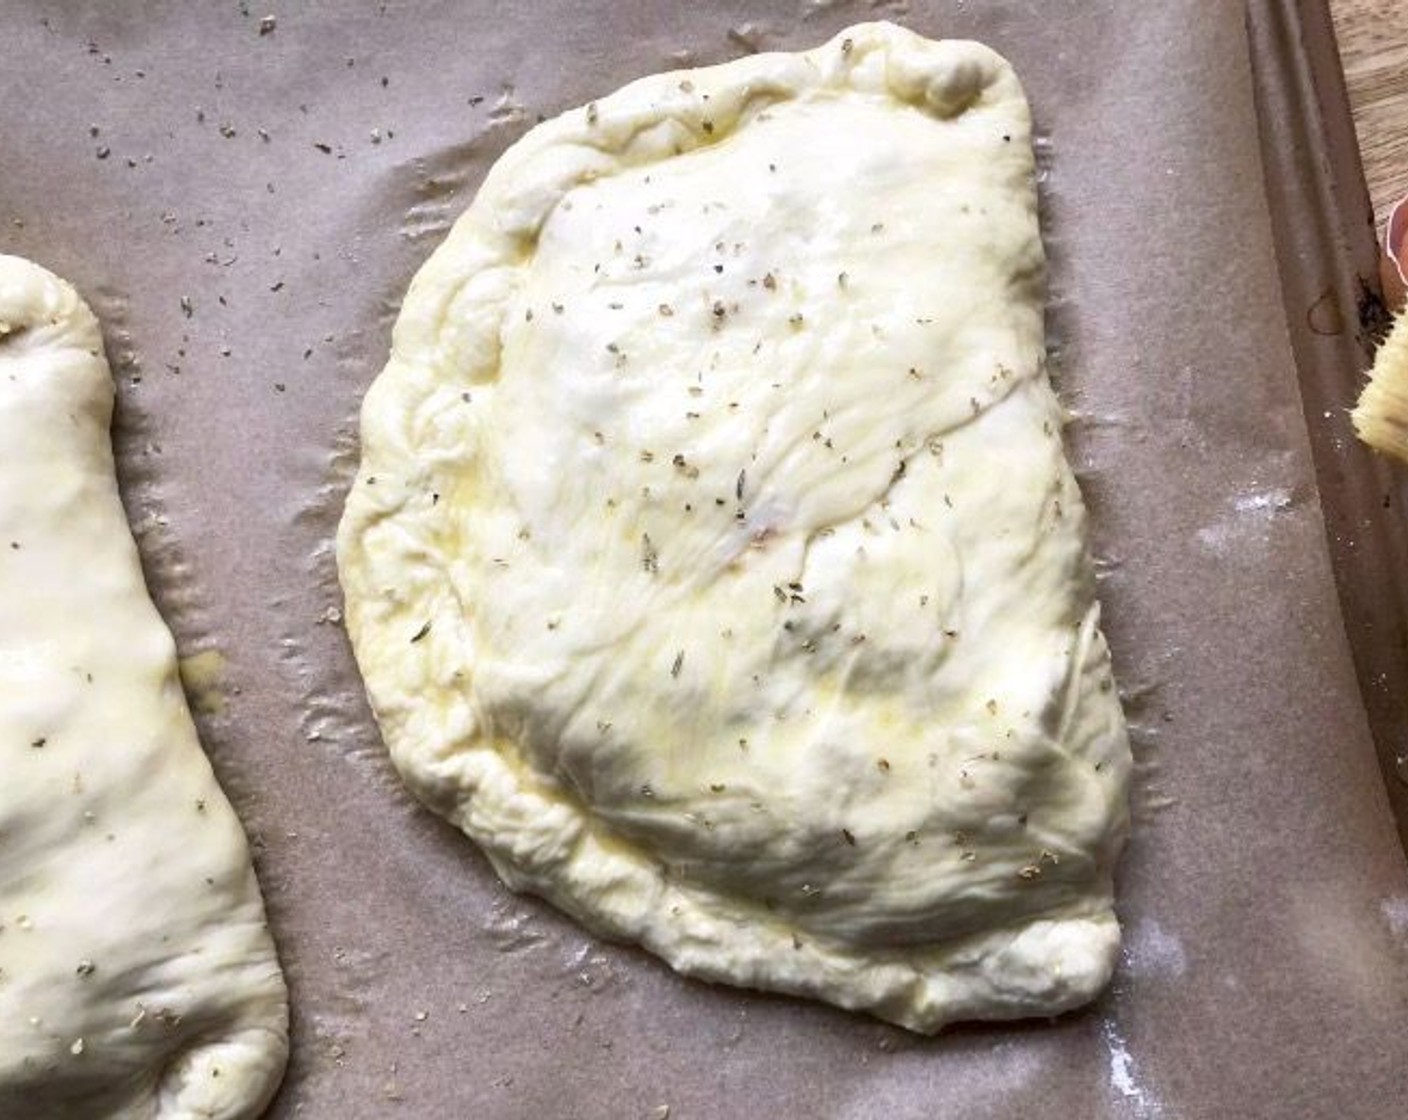 step 6 Transfer the calzones to your prepared baking sheet, spacing at least 2 inches apart. Brush the tops with Egg (1) and apply a sprinkling of Italian Seasoning (1/2 tsp).